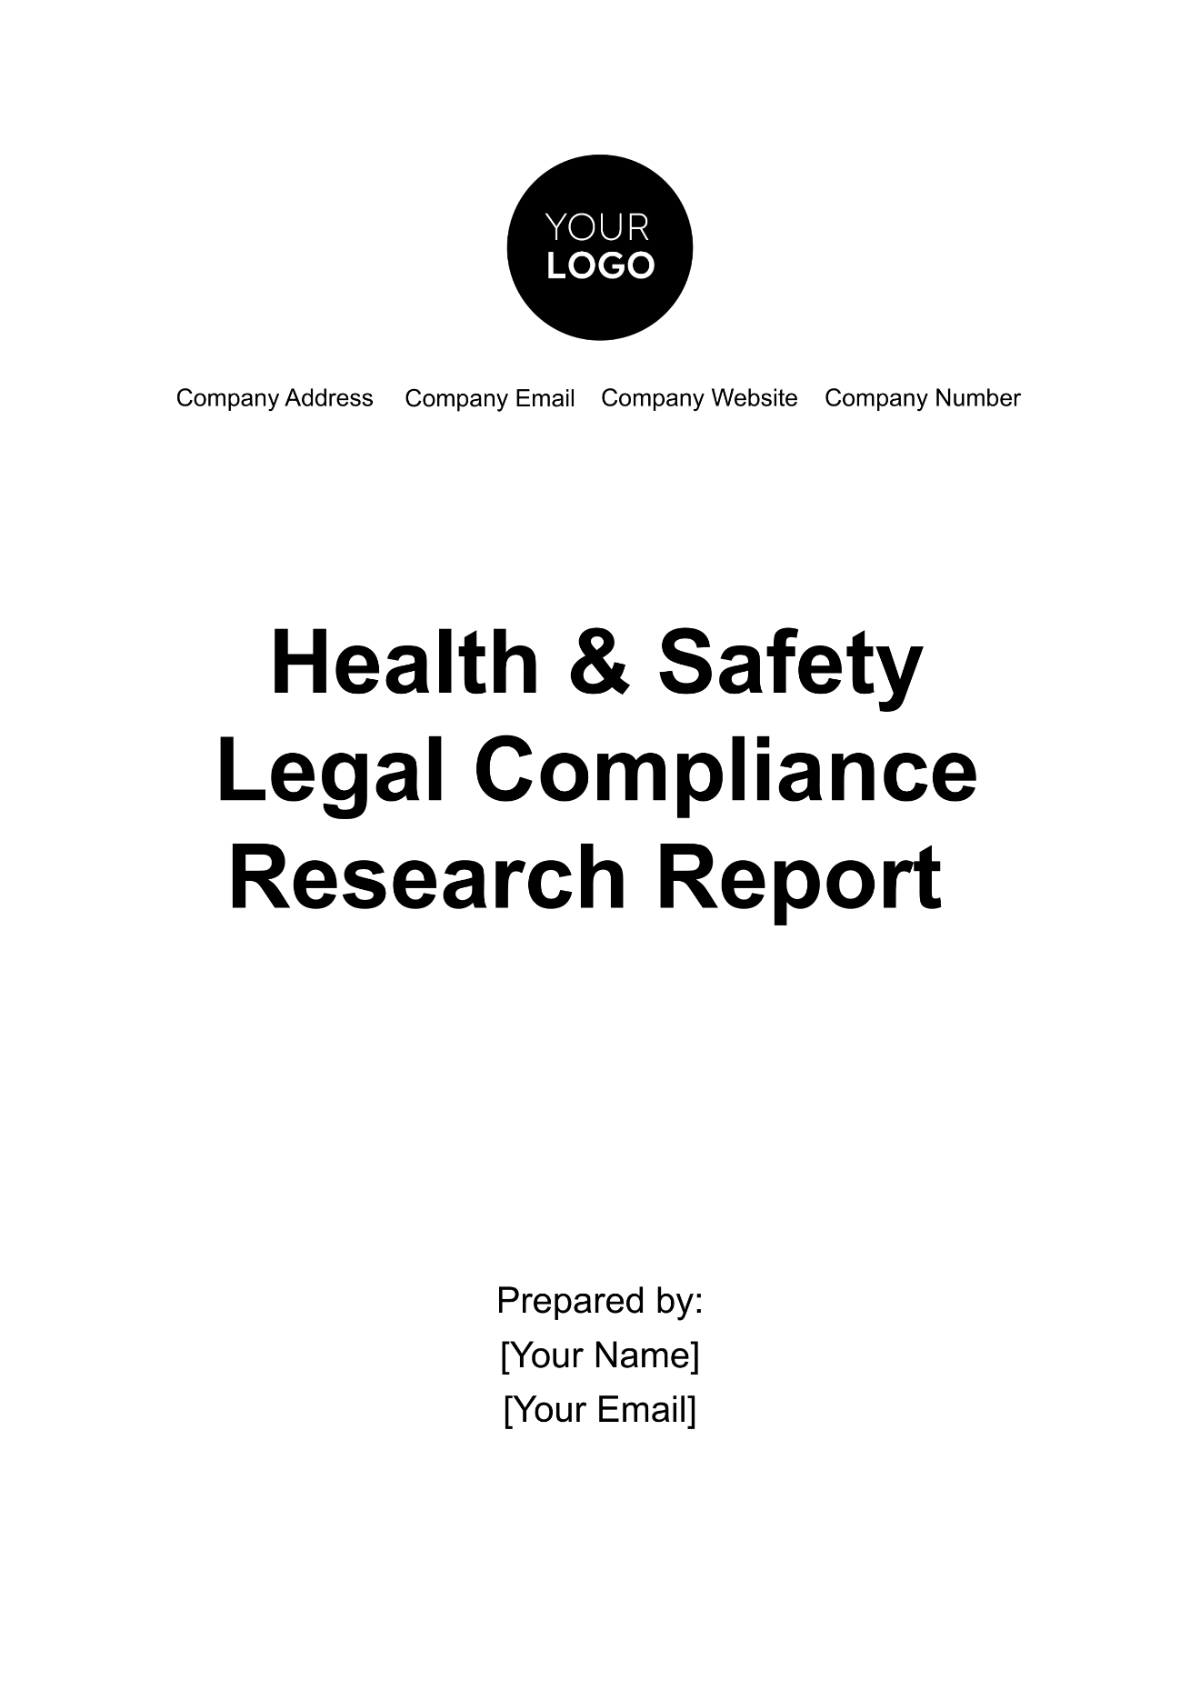 Free Health & Safety Legal Compliance Research Report Template